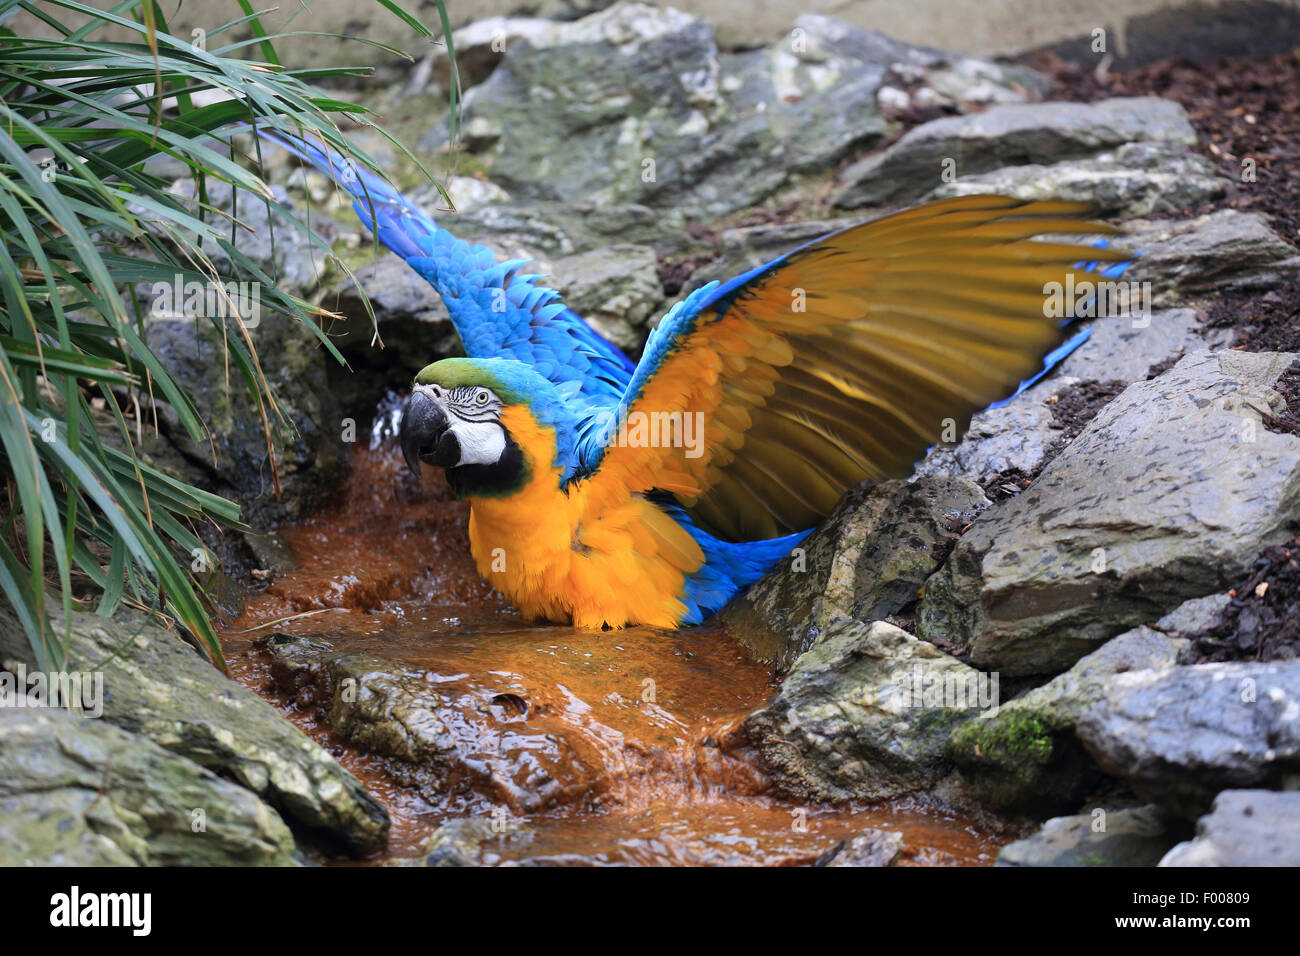 Blue and yellow macaw, Blue and gold Macaw, Blue-and-gold Macaw, Blue-and-yellow Macaw (Ara ararauna), baths Stock Photo